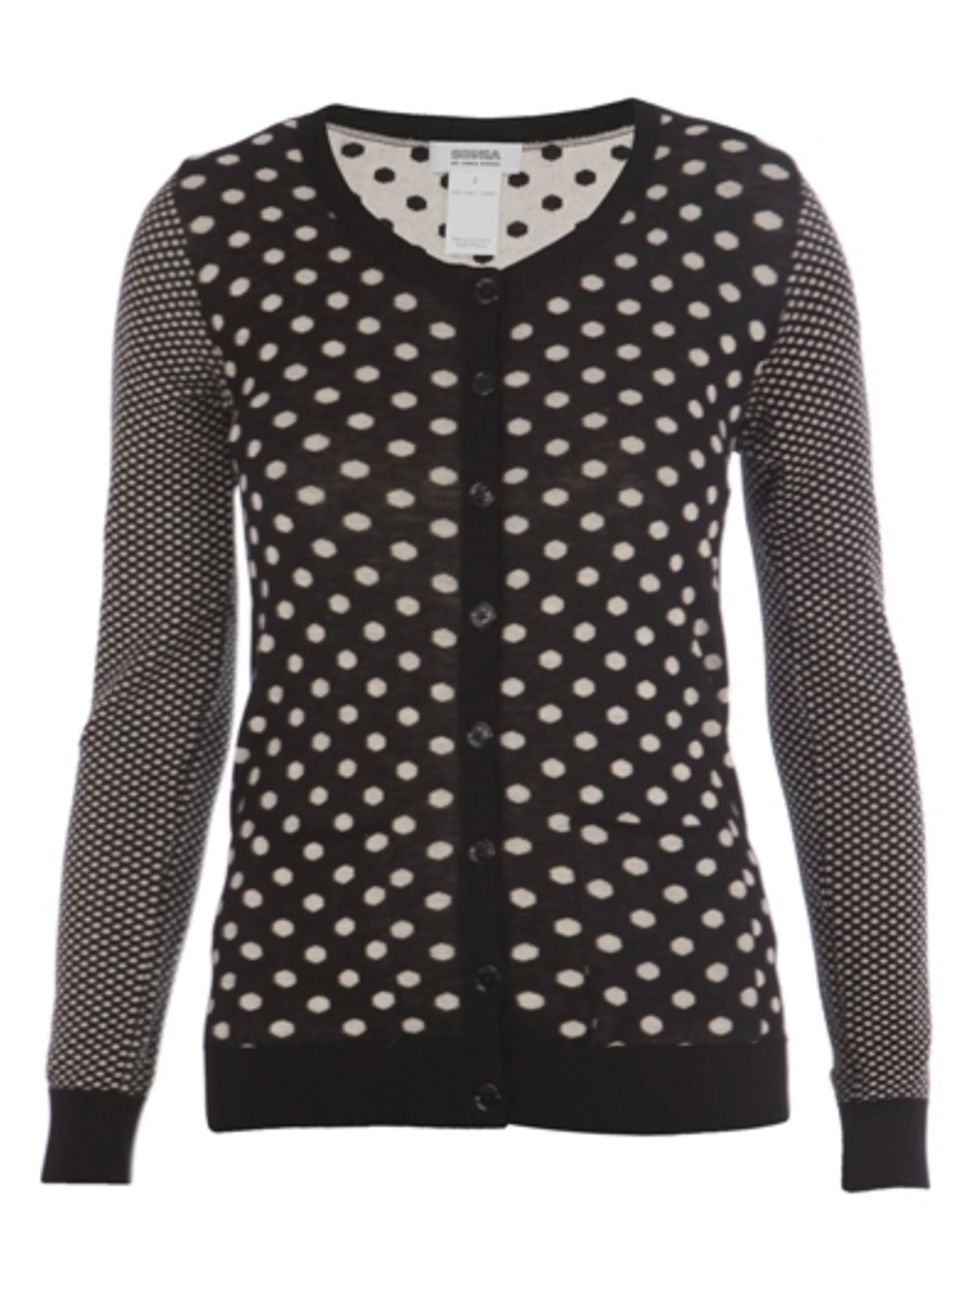 Product, Sleeve, Pattern, Collar, White, Style, Black-and-white, Polka dot, Black, Grey, 